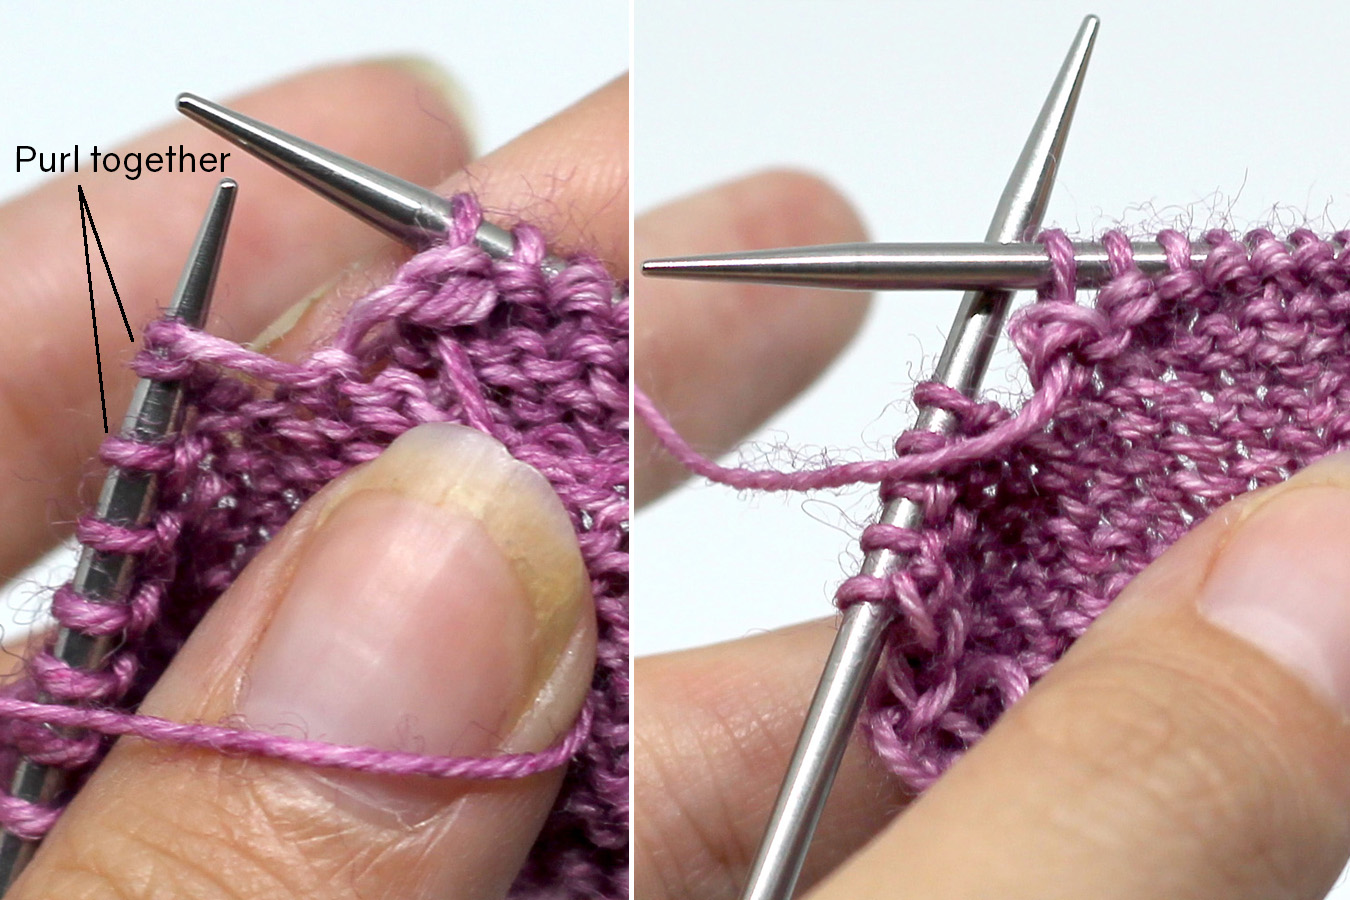 Two images showing the purl side of a piece of knitting. Left image: The double stitch formed in step 6 is on the left-hand needle next to a normal stitch. Right Image - The double stitch and single stitch have been purled together, like a p3tog